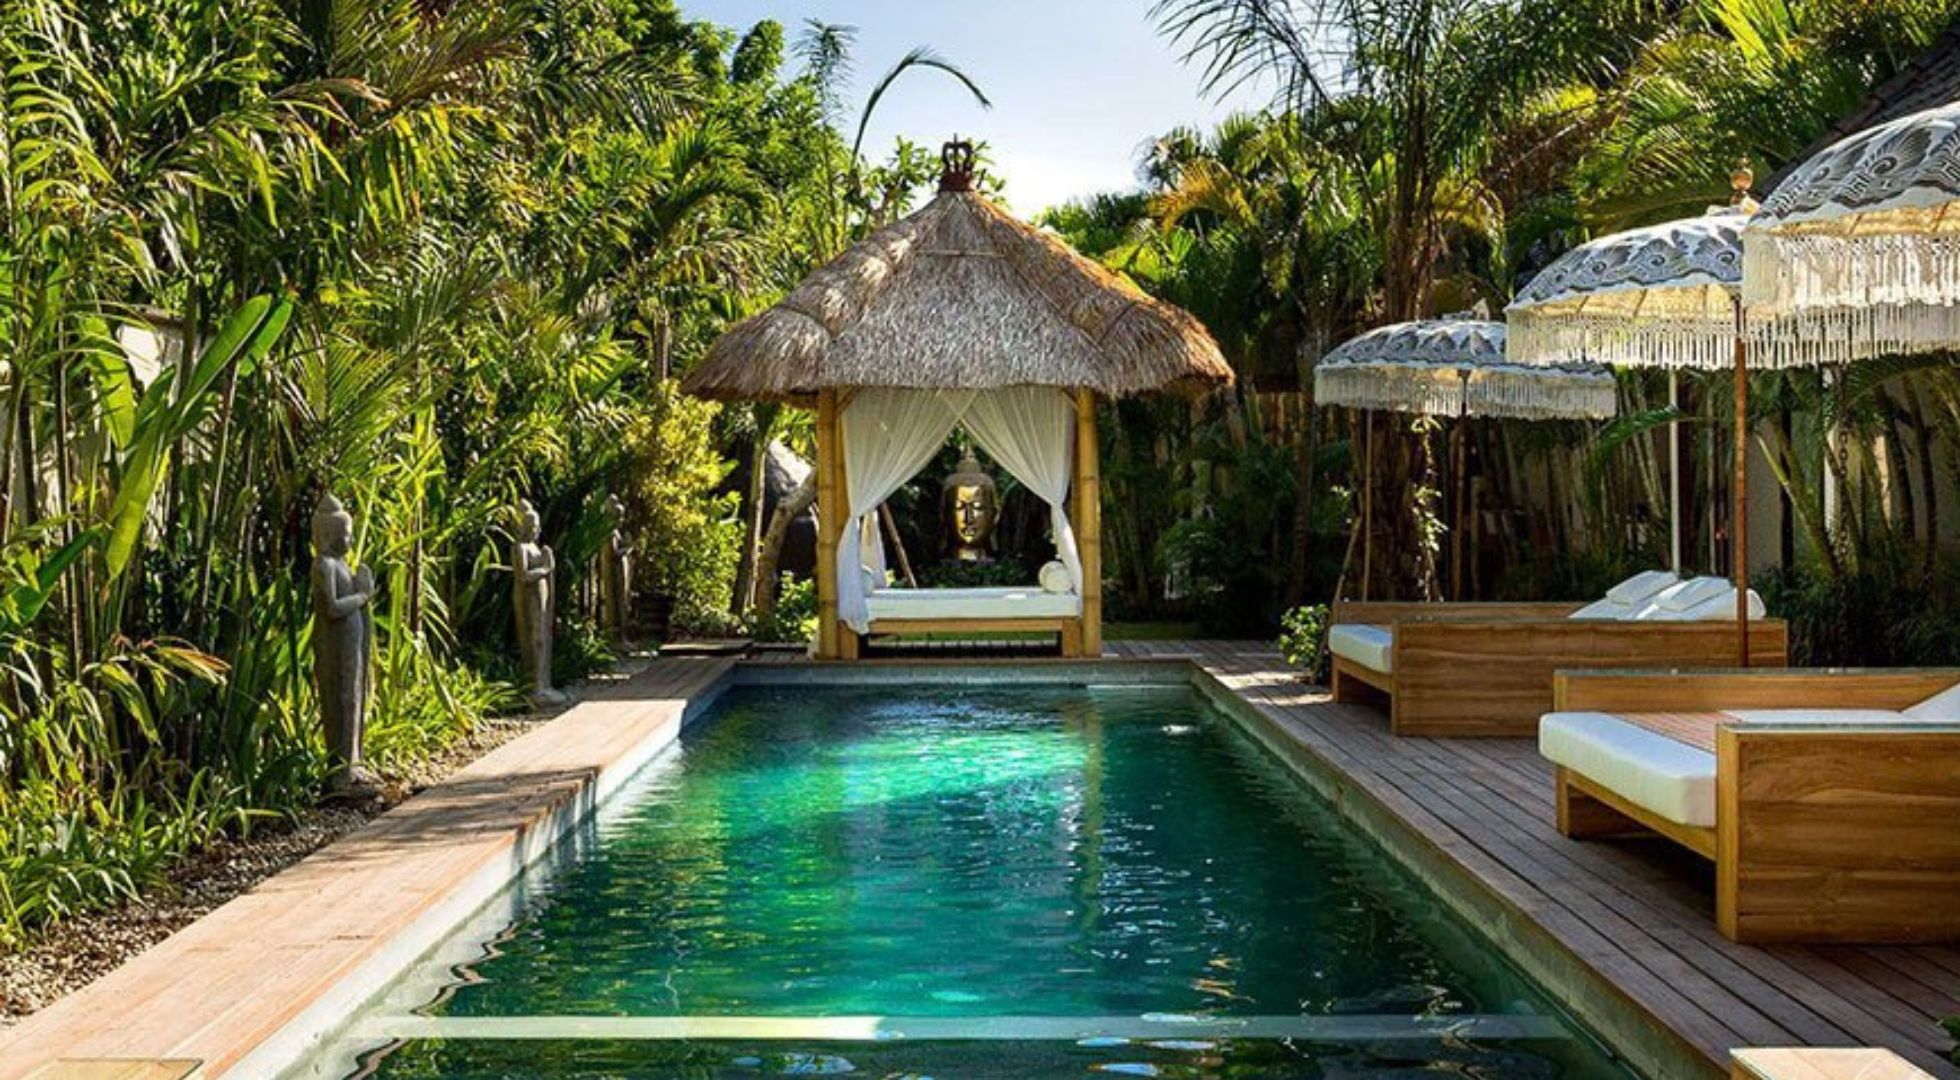 Bliss Sanctuary For Women in Bali offers meditation experiences